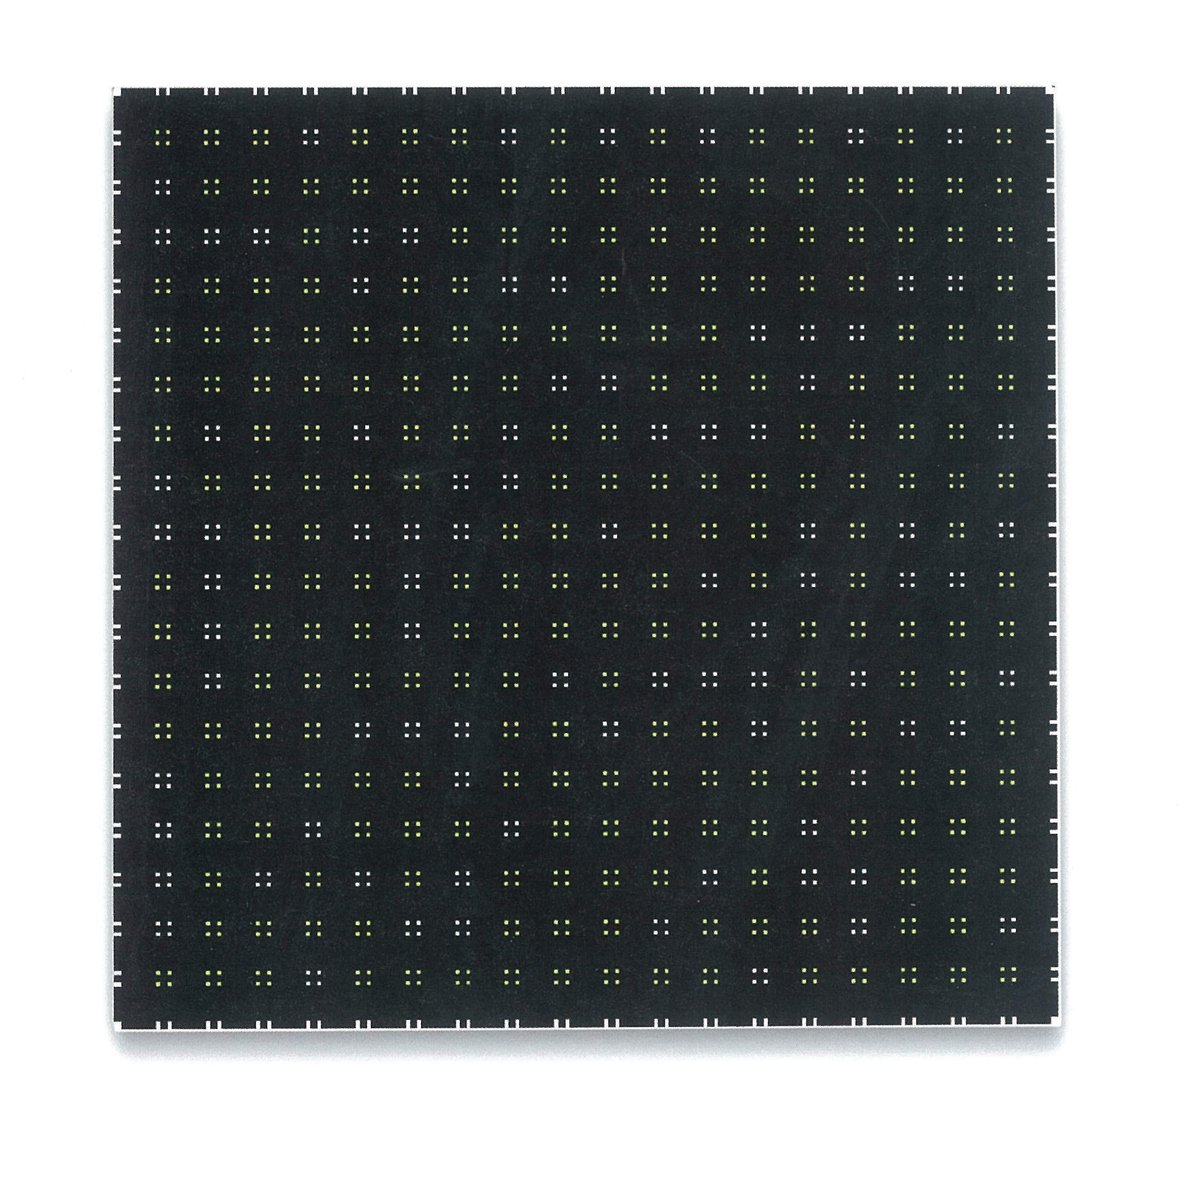 painting, white and yellow dots on black